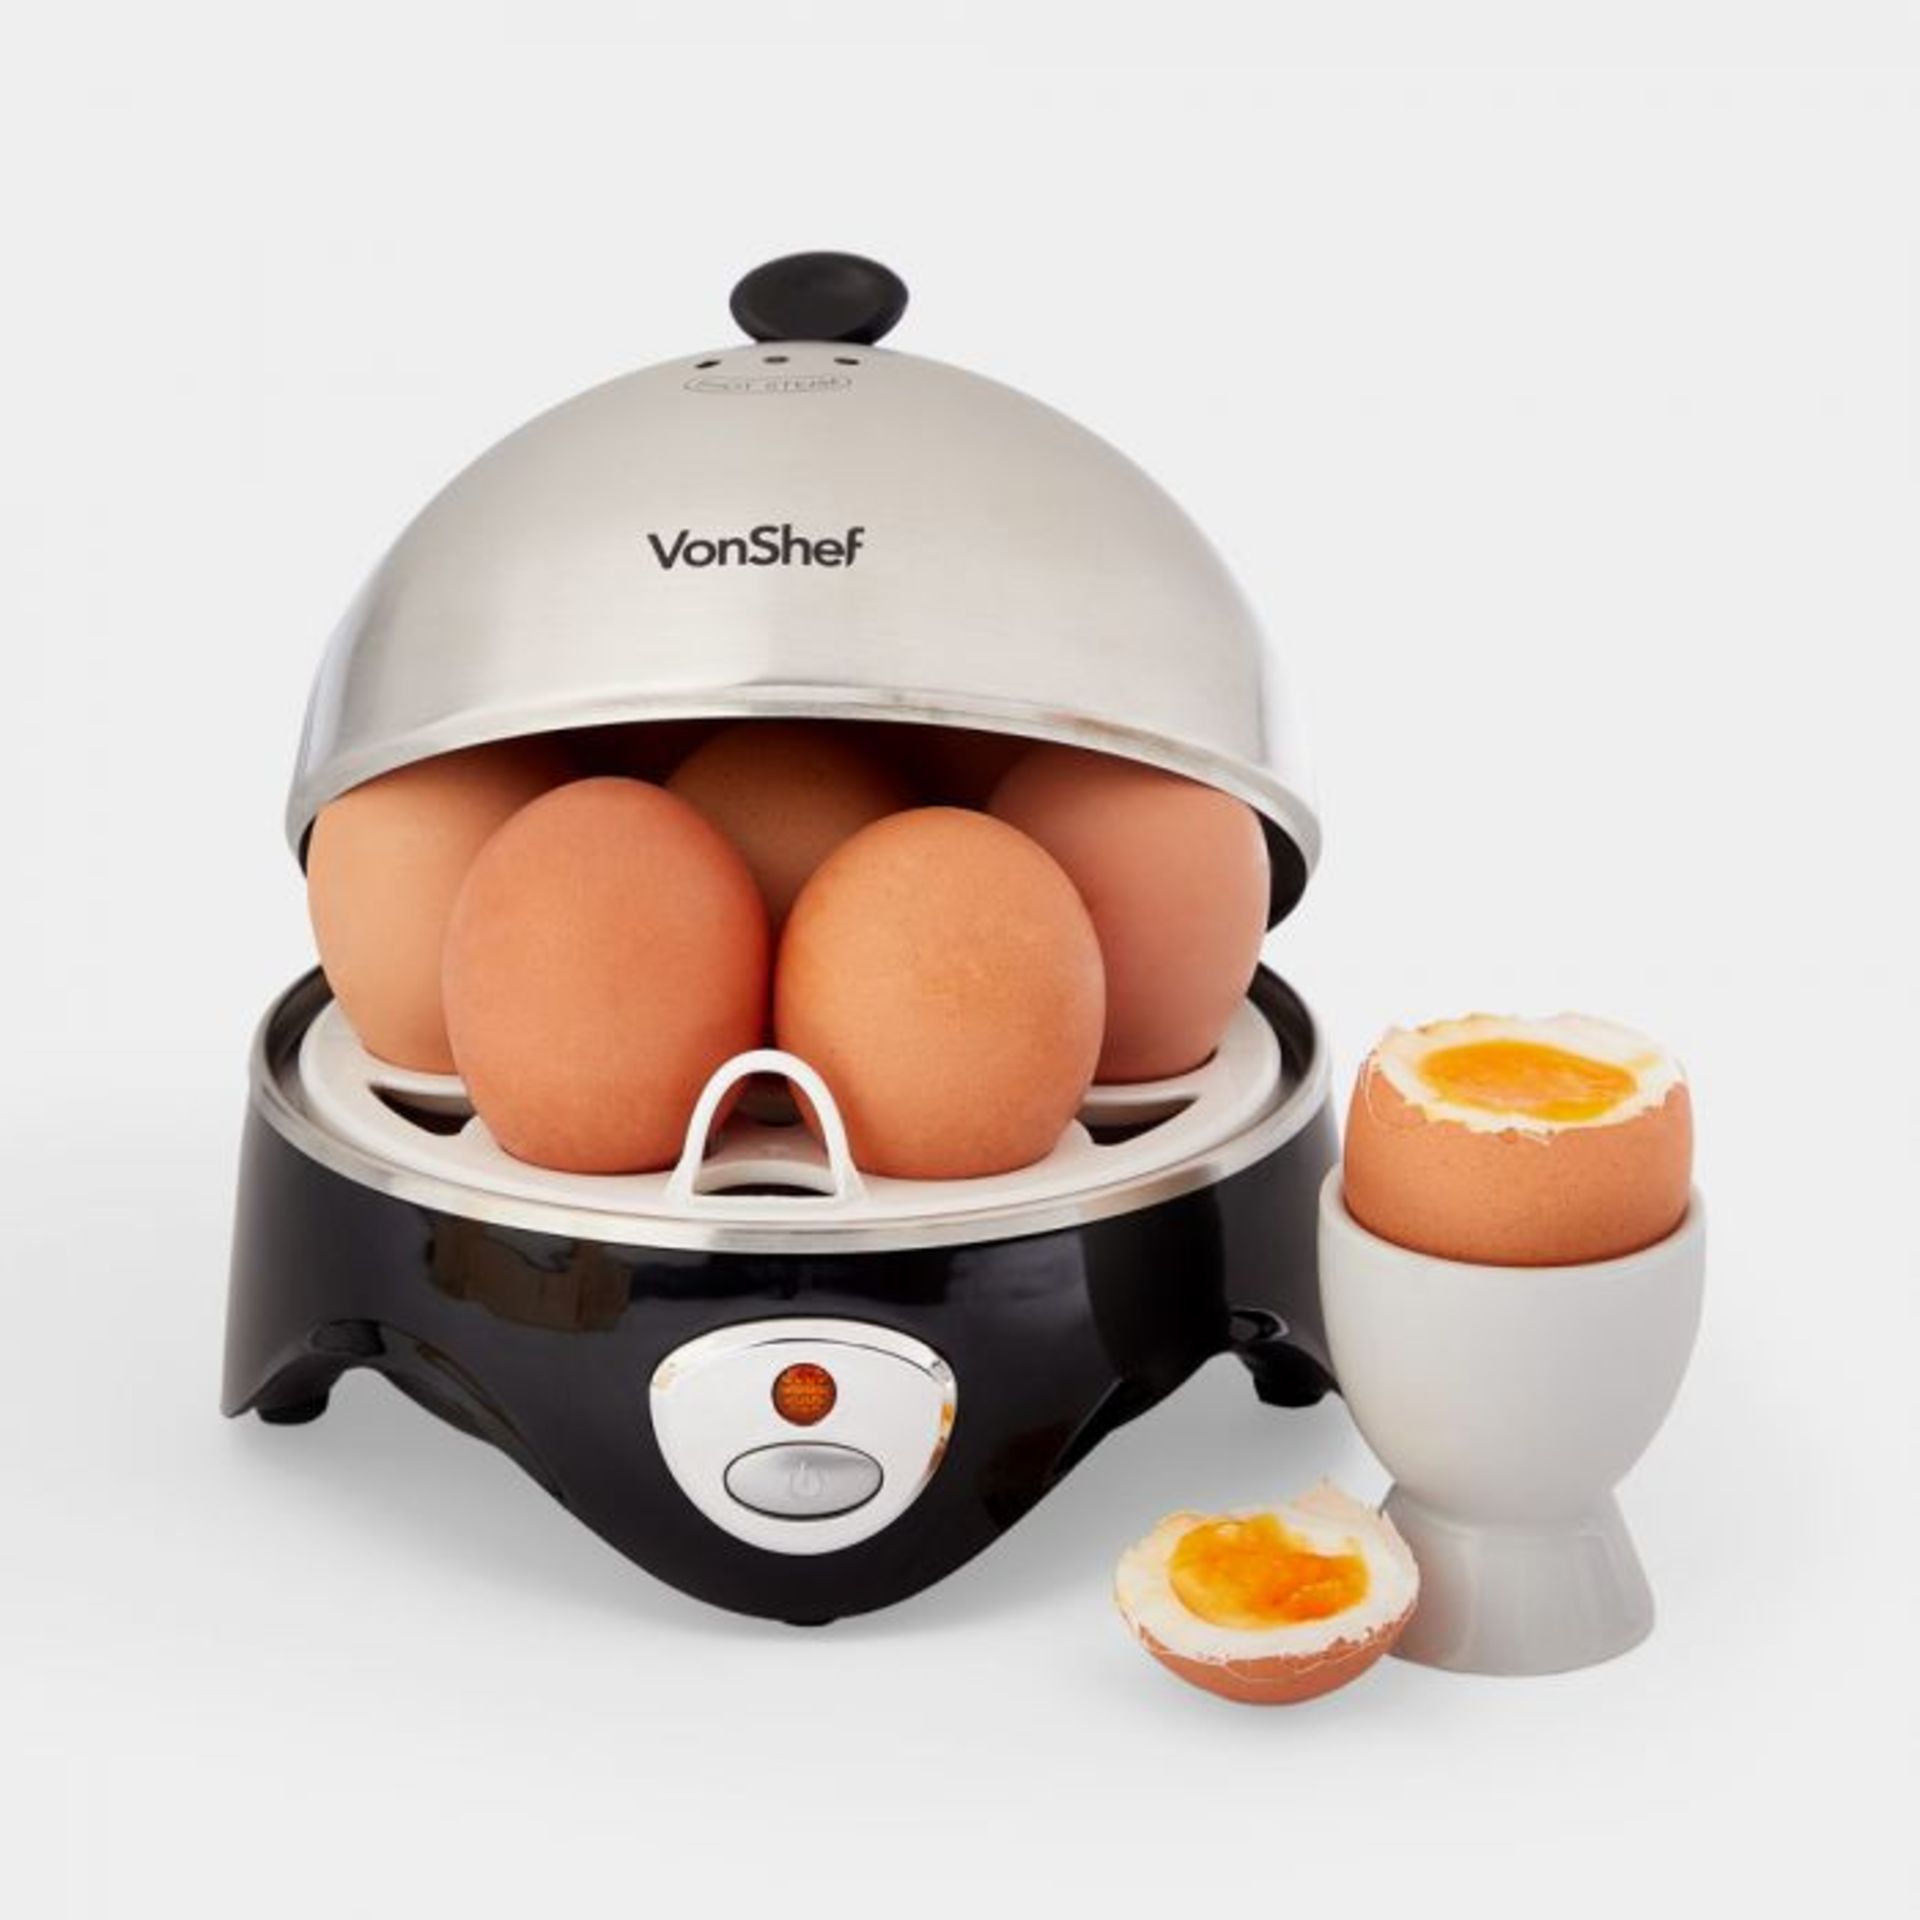 Egg Boiler. Whether you like yours hard, medium or soft boiled, the Electric Egg Boiler will cater